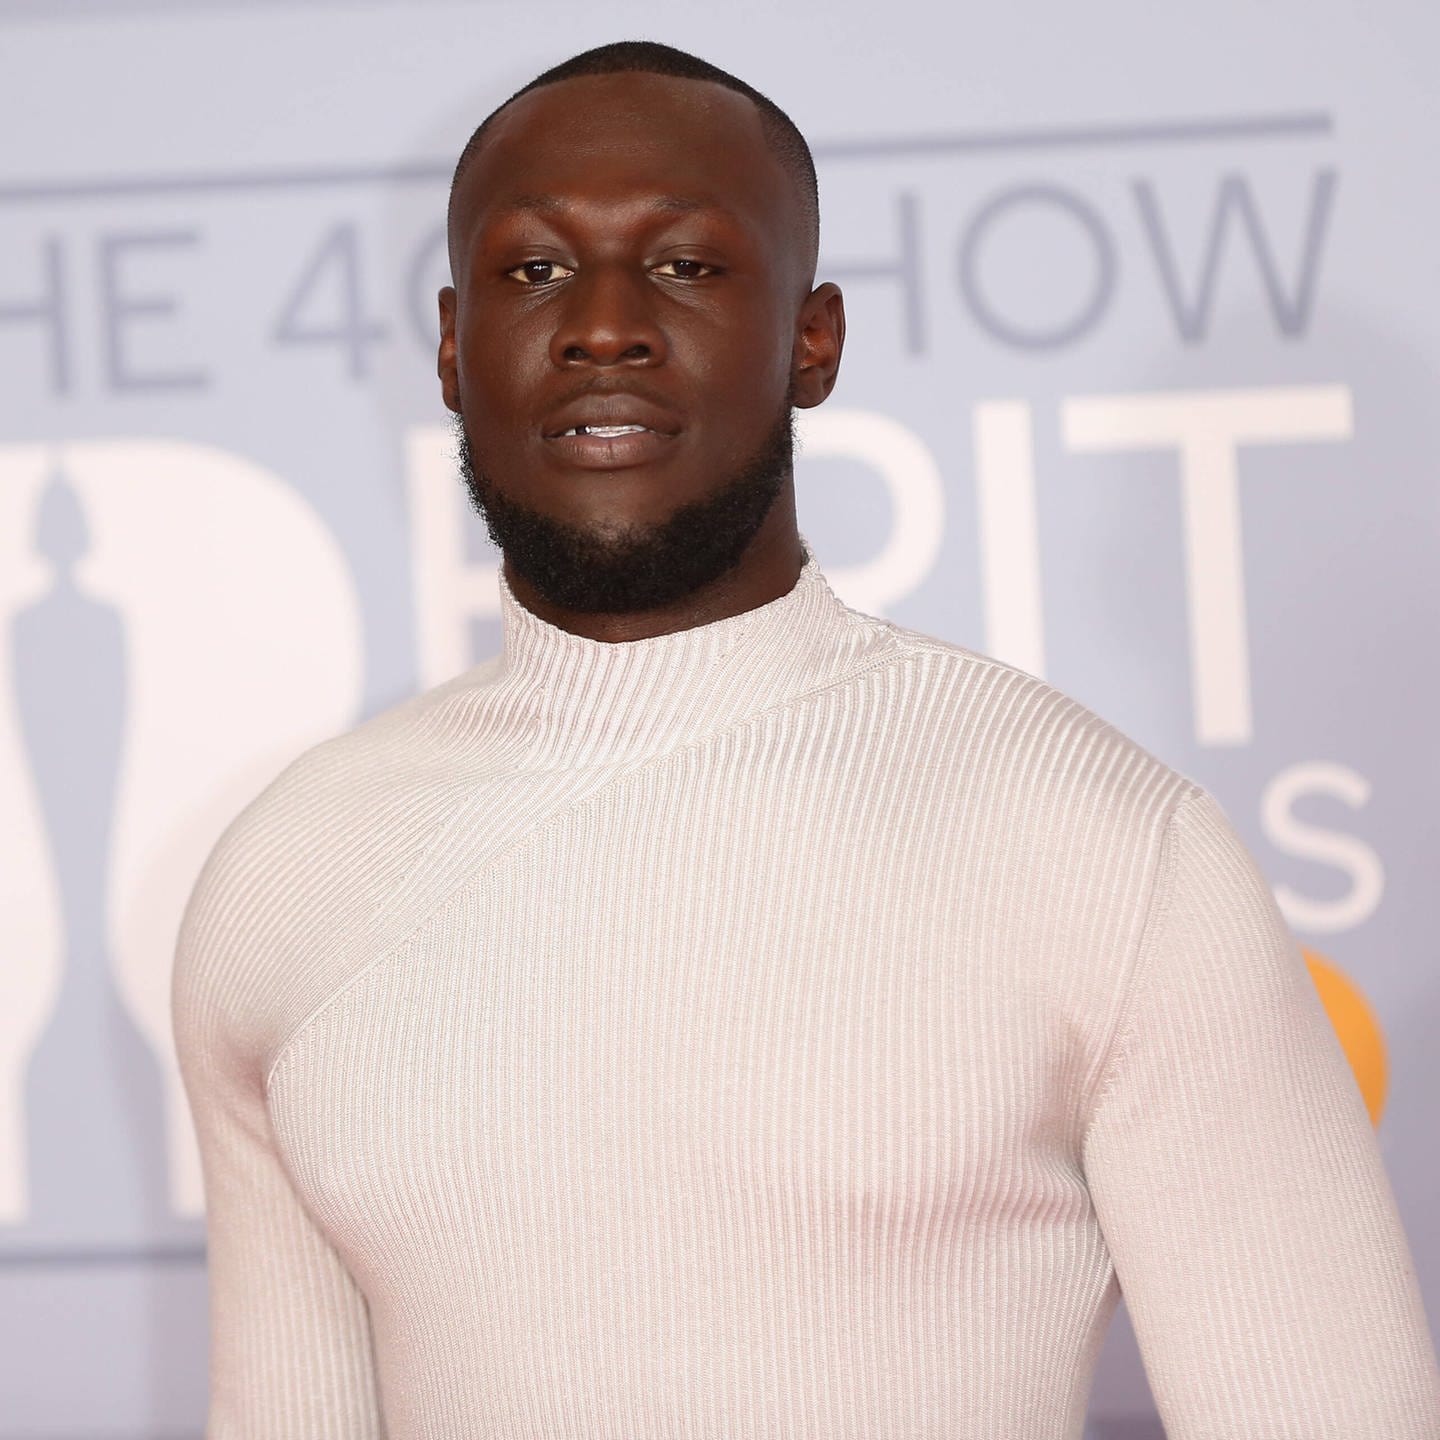 Who Is Stormzy New Relationship Girlfriend In 2022? Here's What We Know About Saffron Hocking